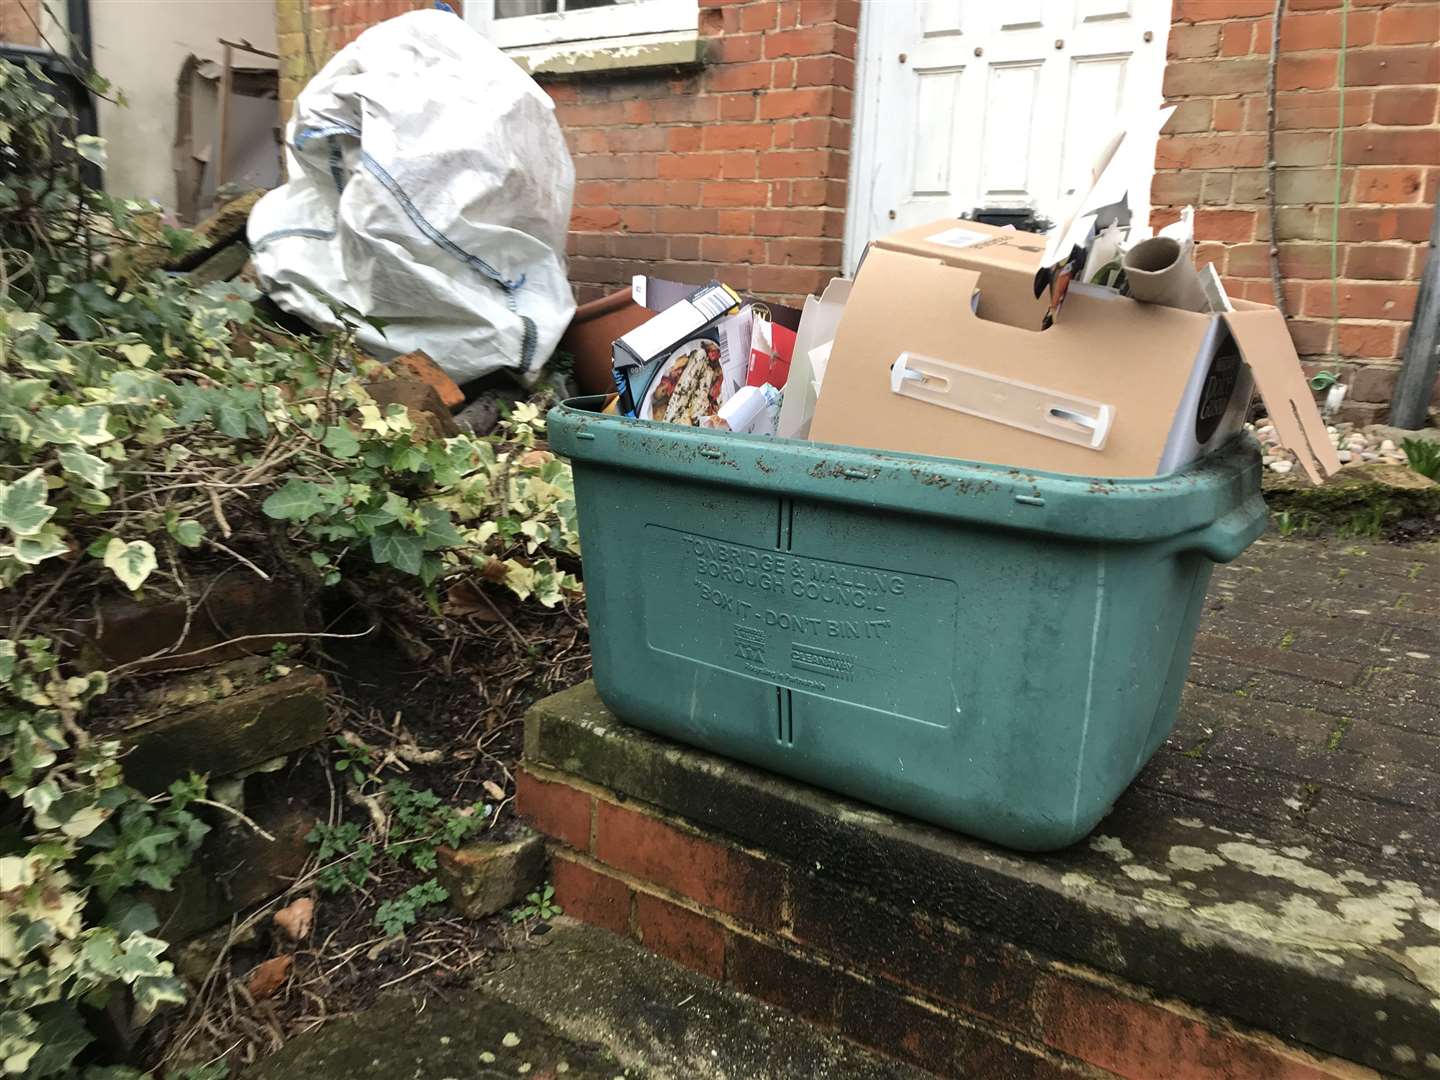 Numeous homeowners complained to the council